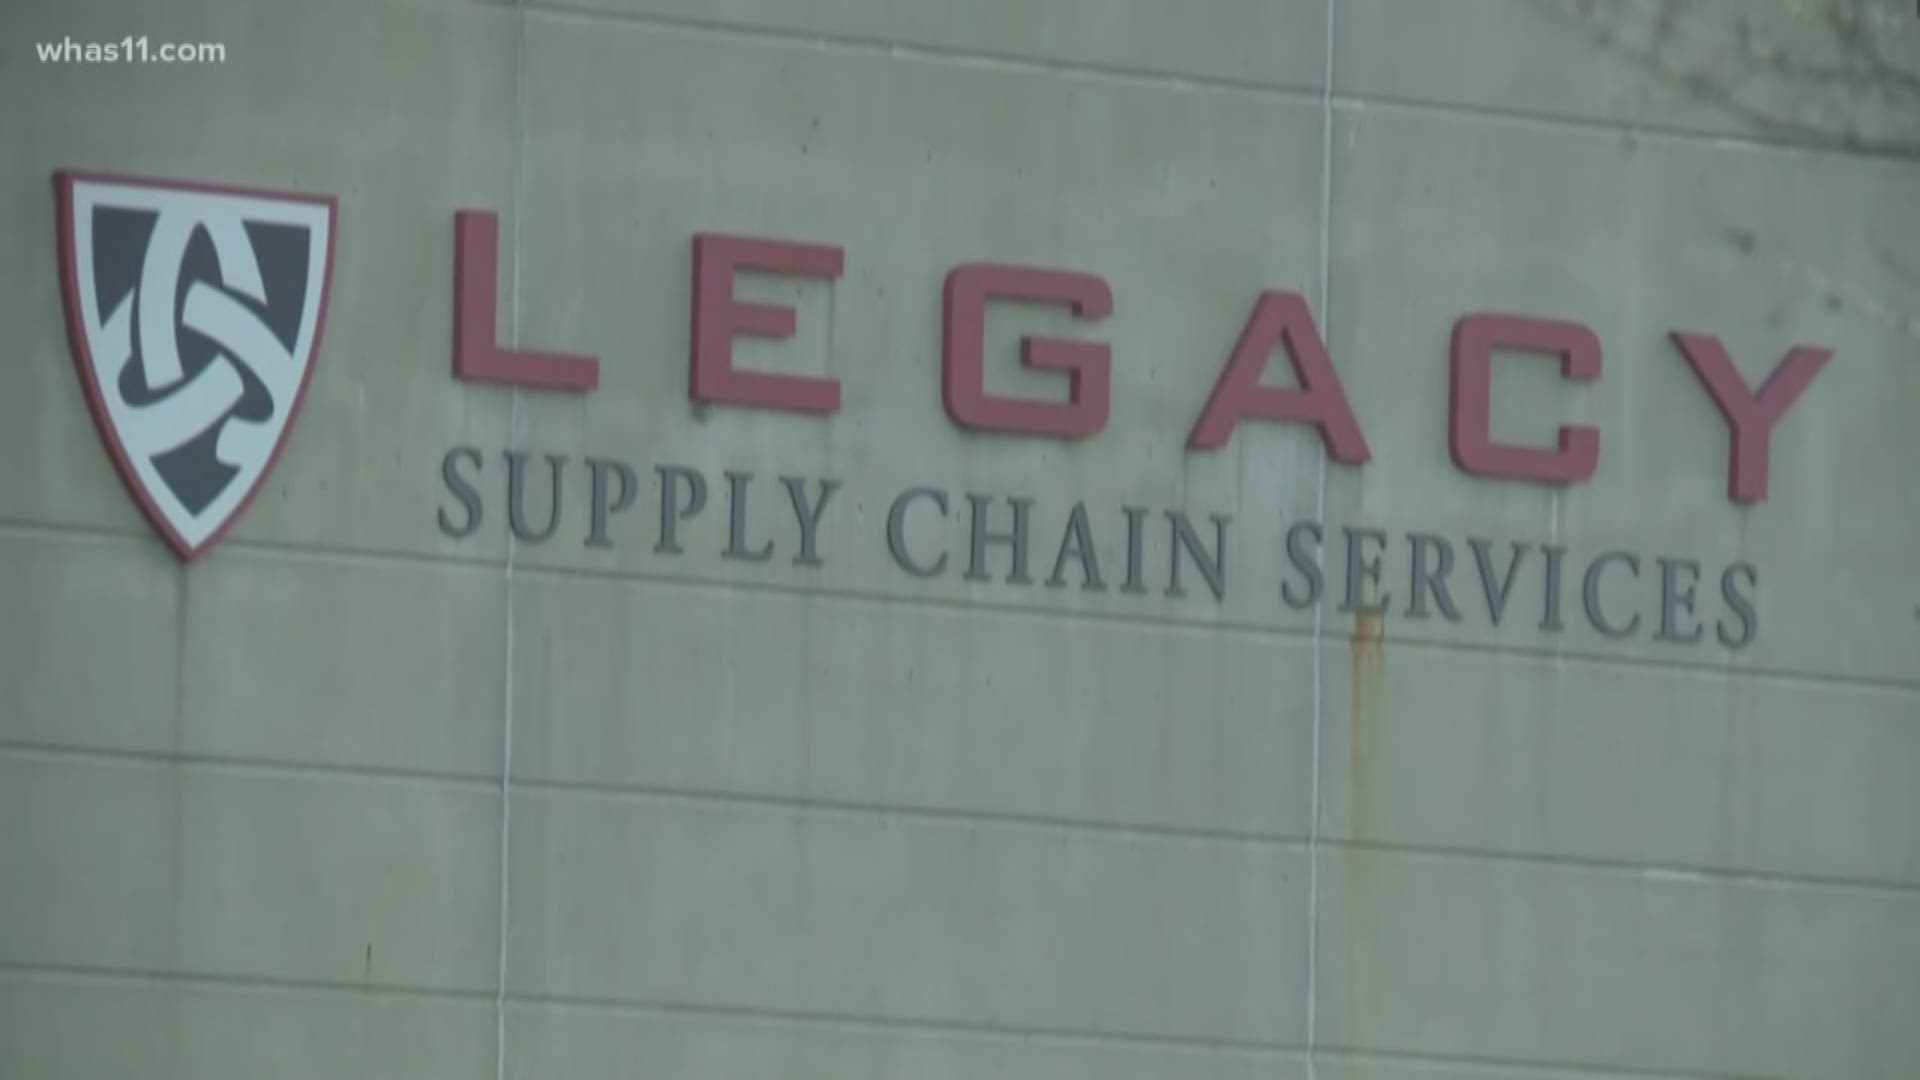 More than 200 workers at Legacy Supply Chain Services in Jeffersonville could be on the out when the warehouse changes hands in less than two months.